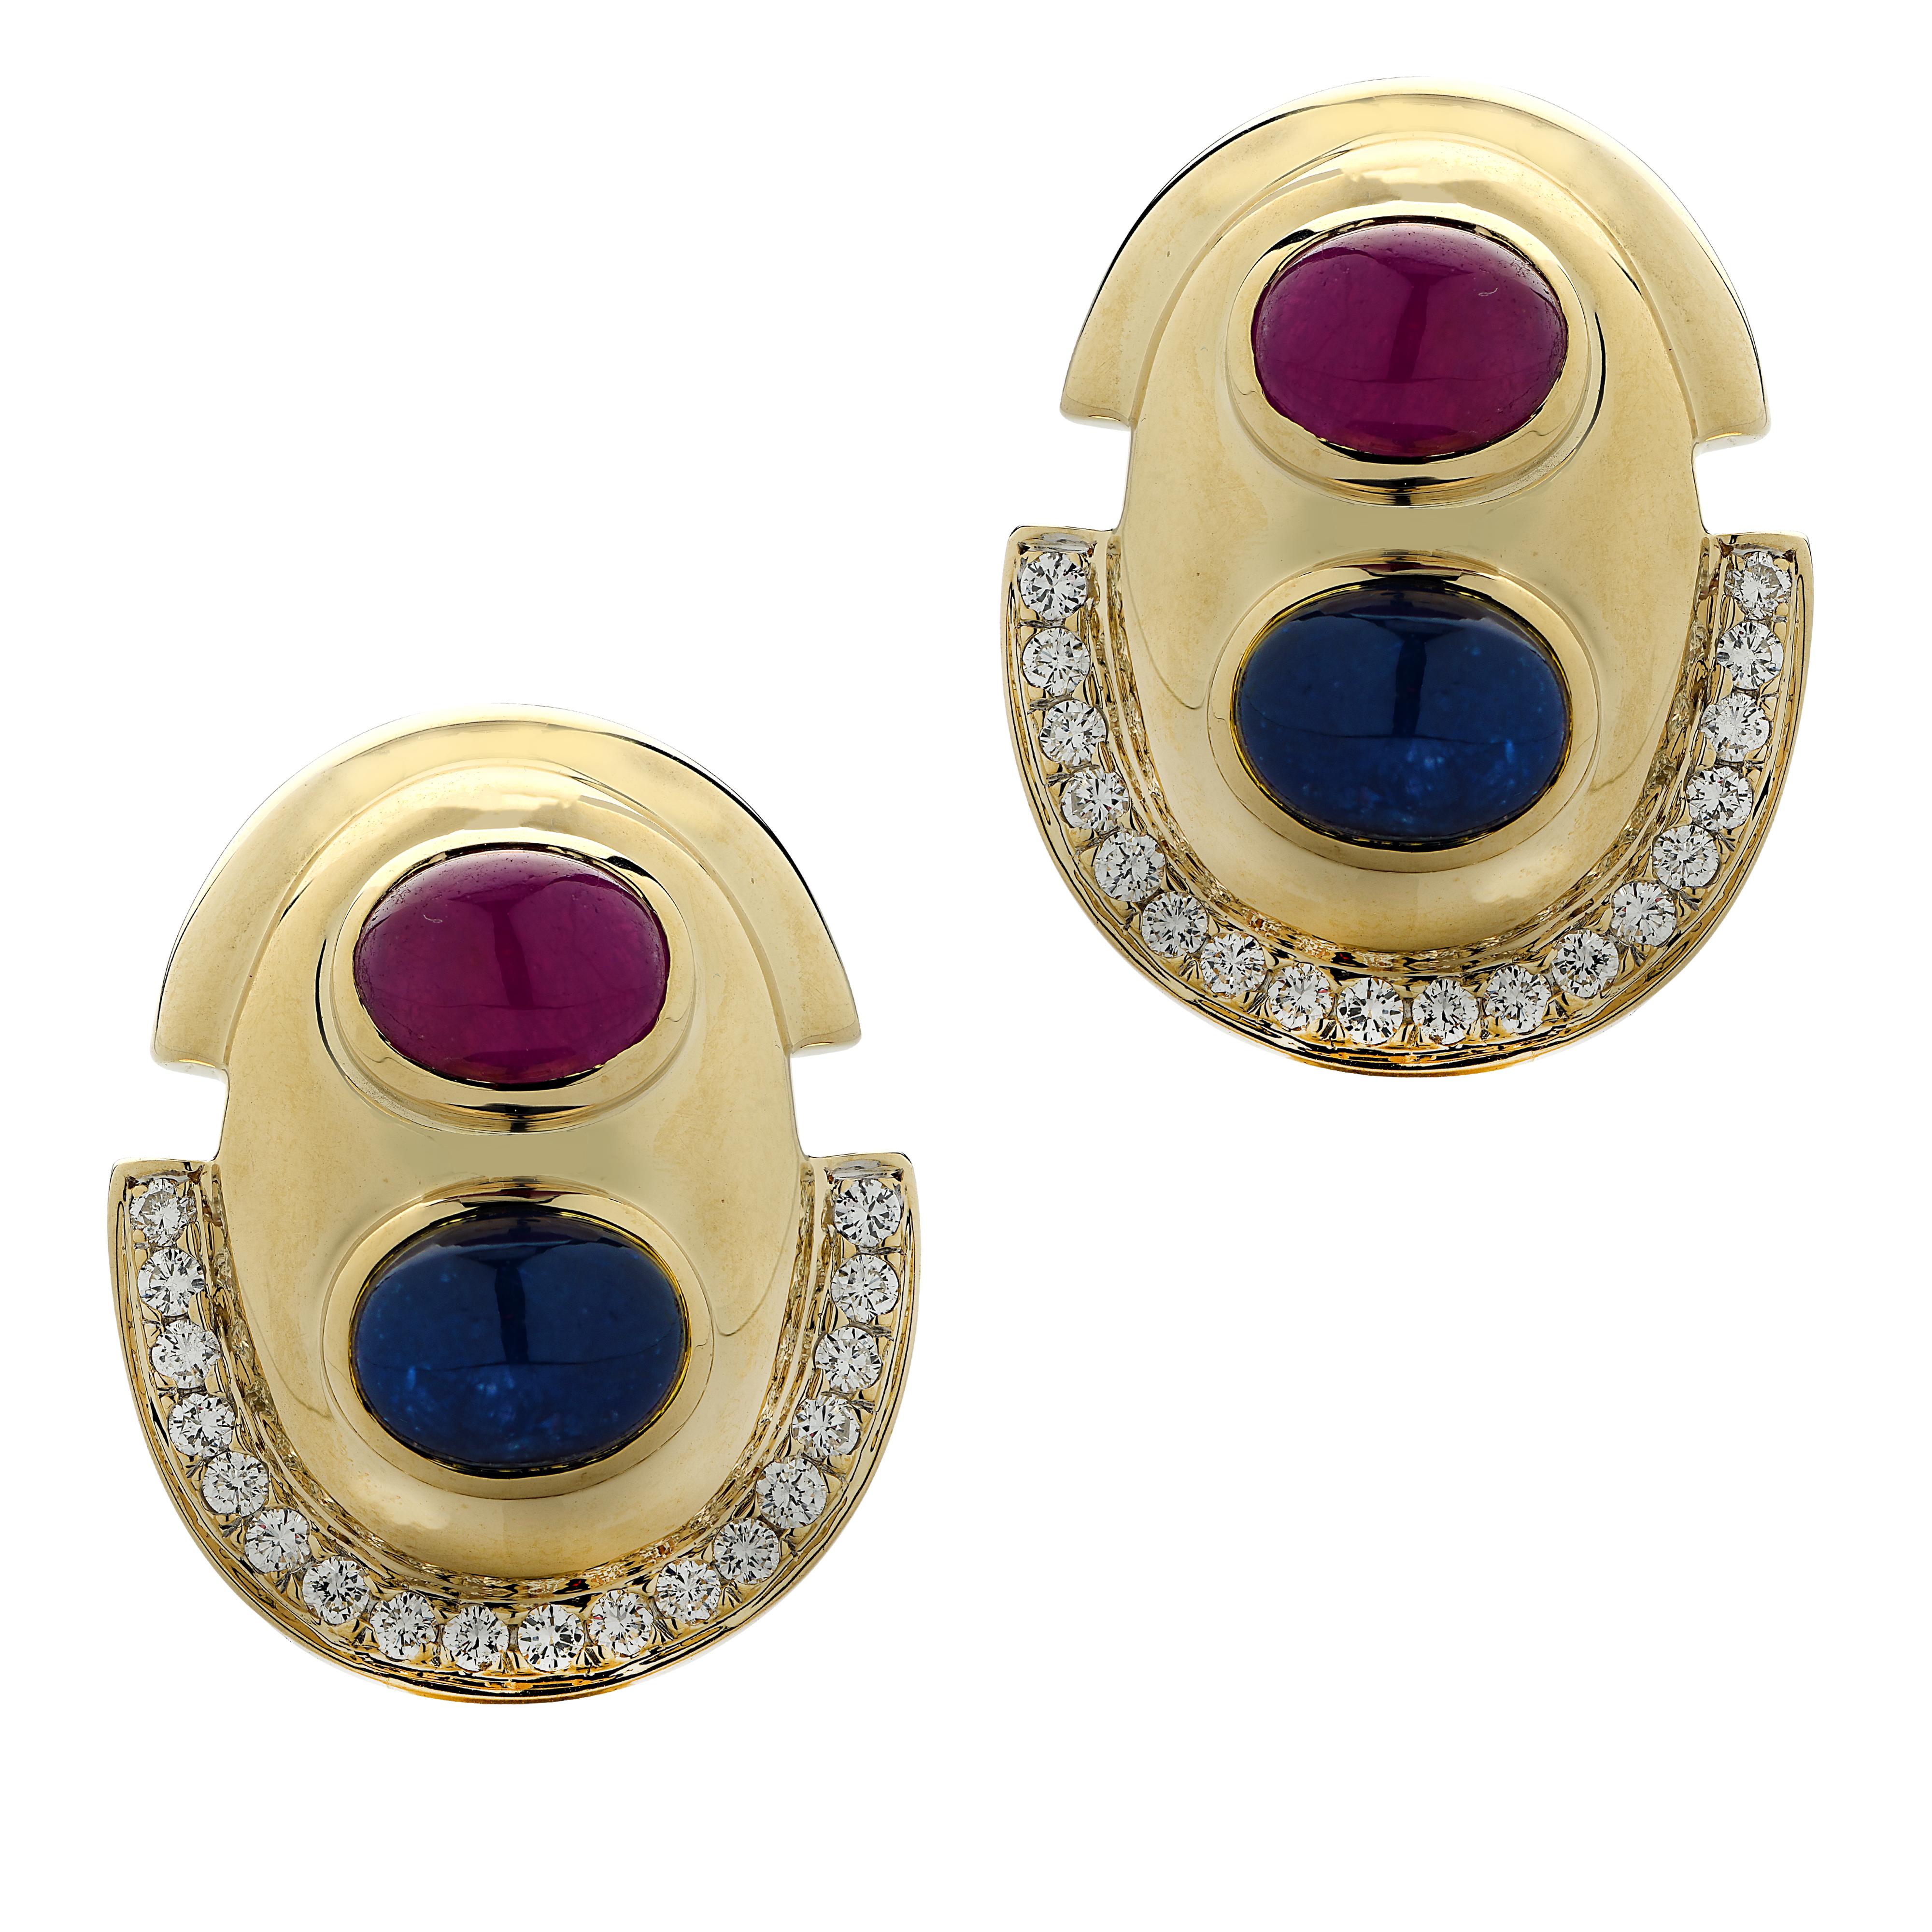 Cabochon Diamond, Ruby and Sapphire Earrings